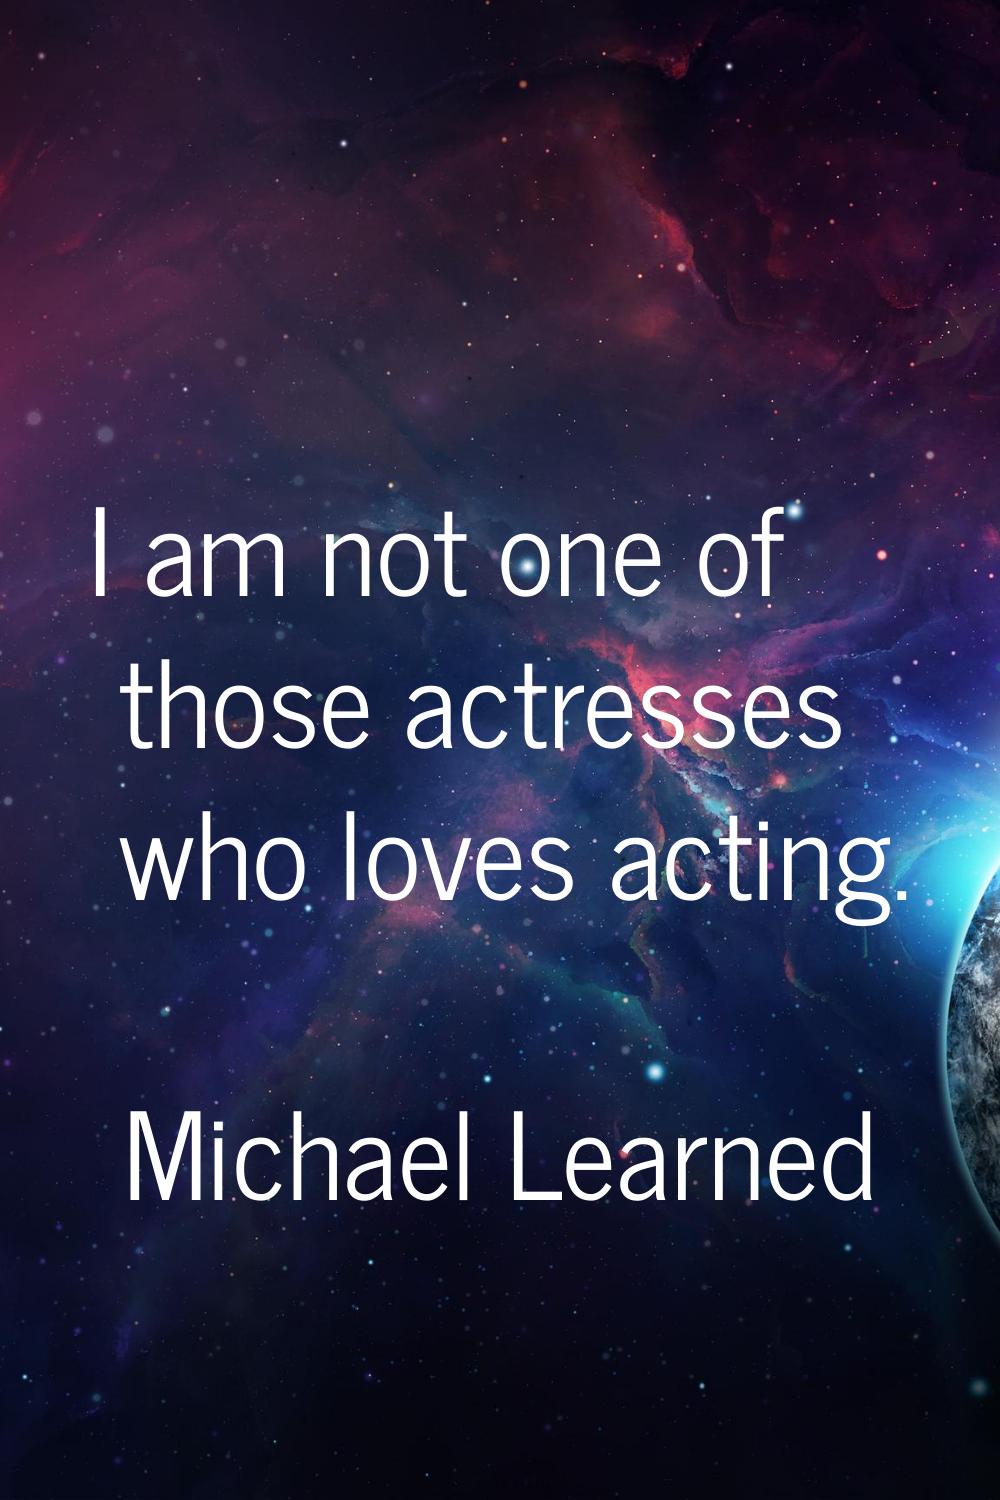 I am not one of those actresses who loves acting.